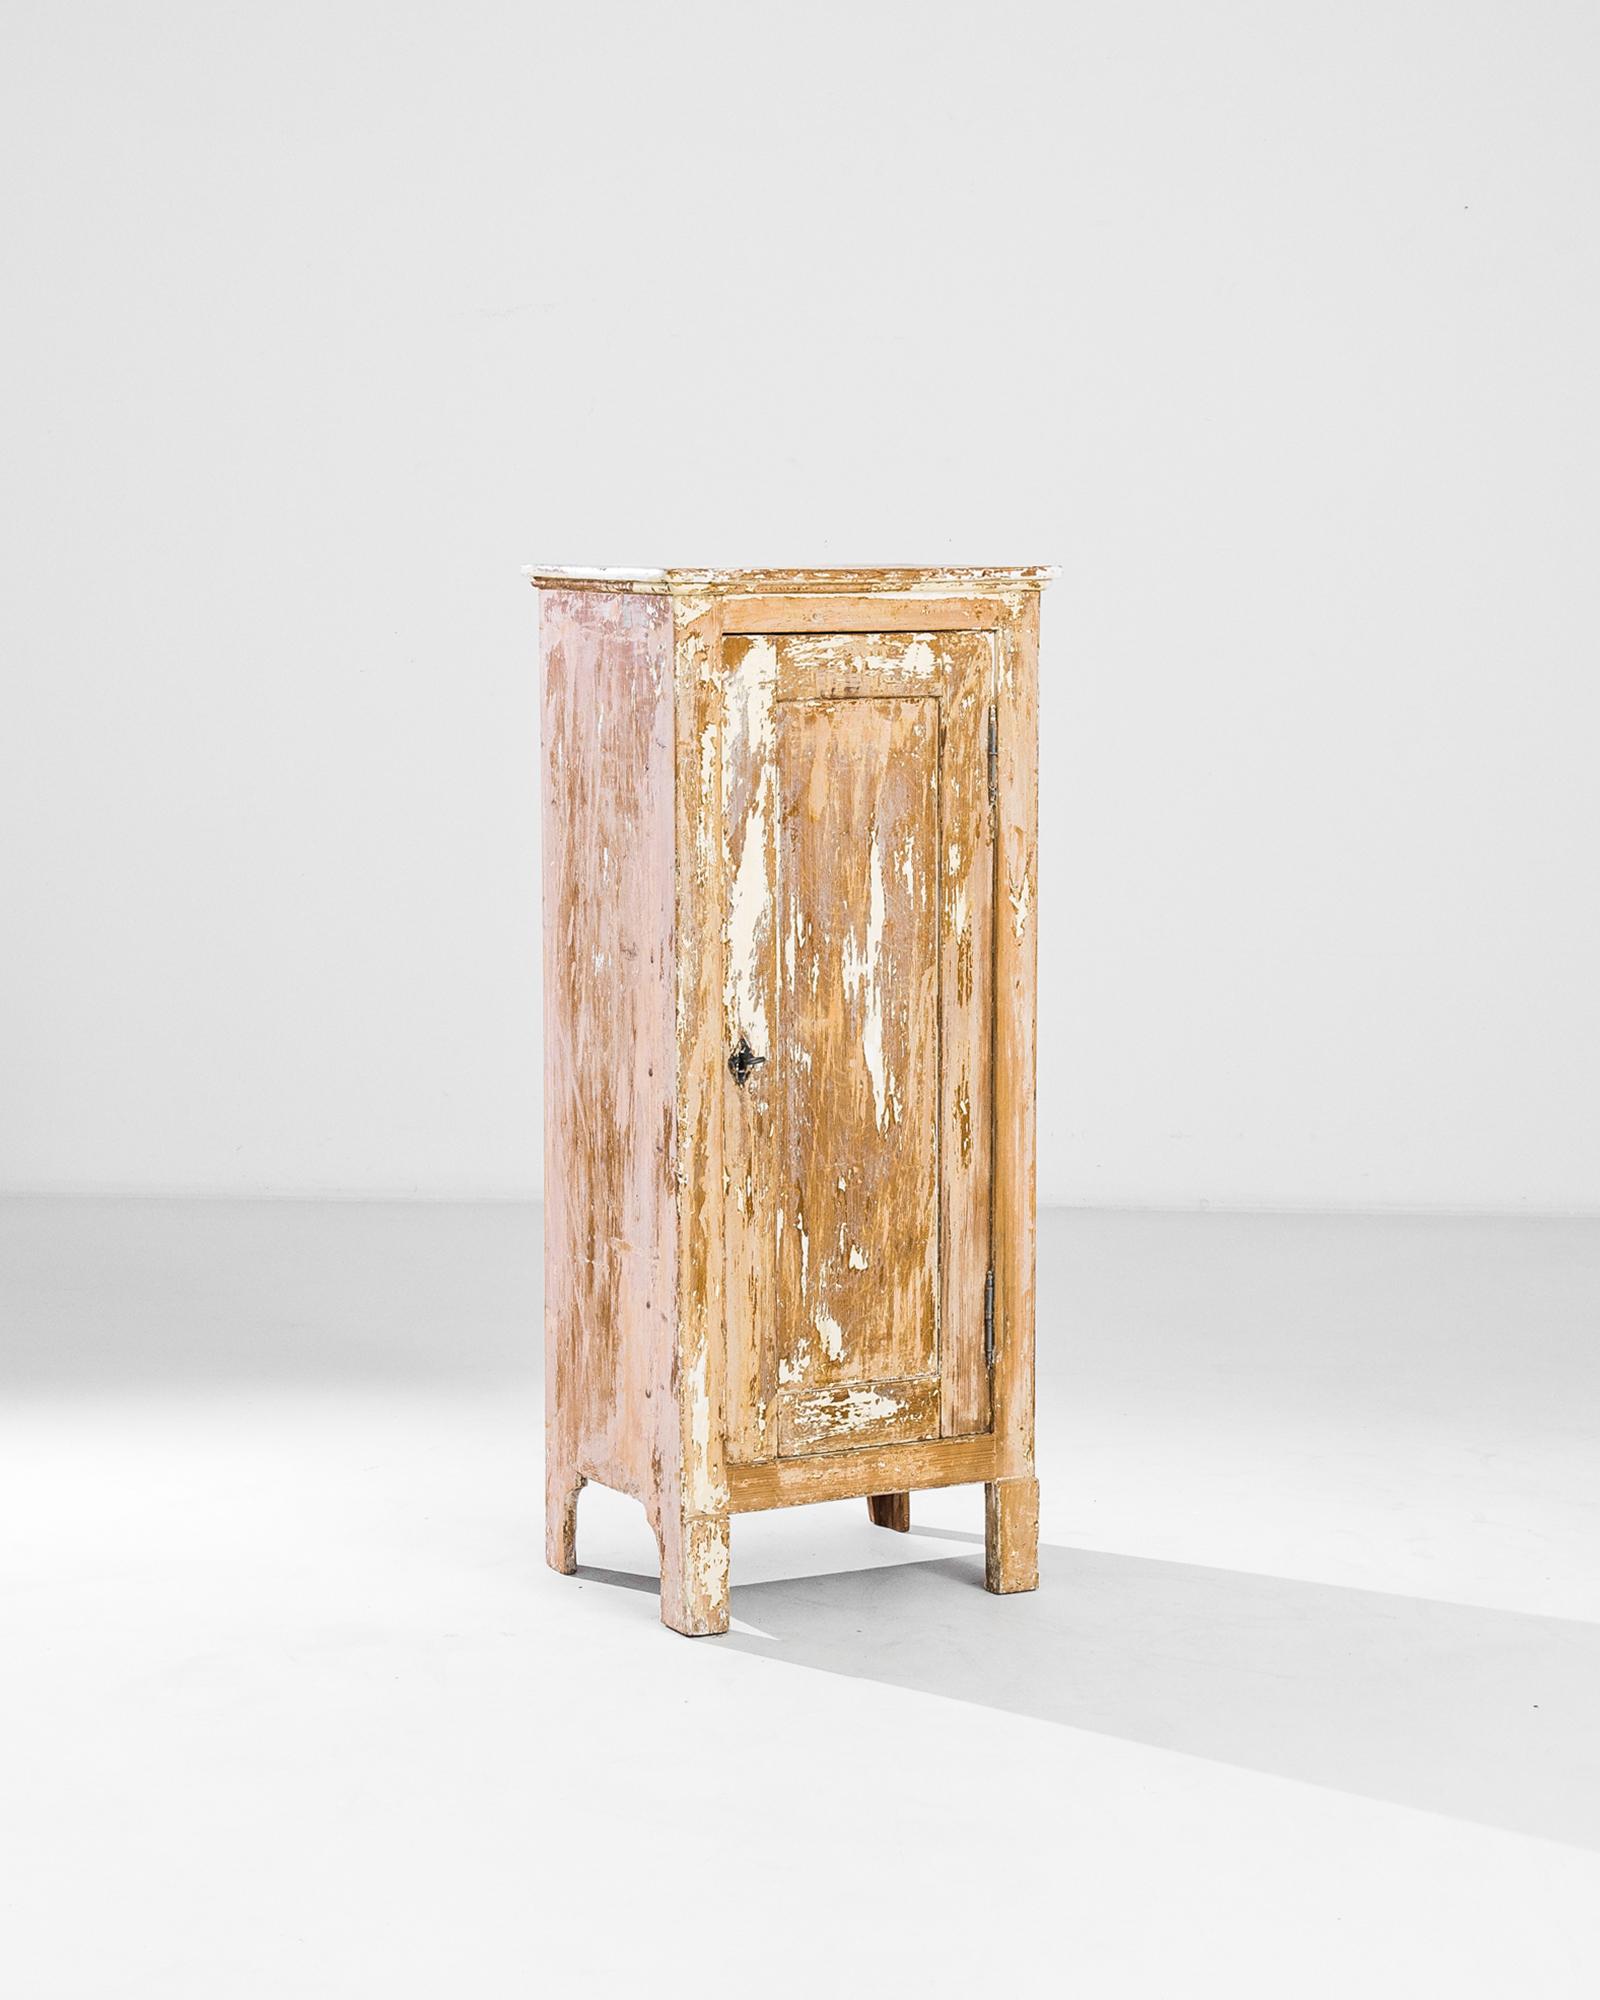 A patinated wood cabinet from France, produced circa 1900. A small cabinet streaked with remnants of white patination across the facade, top and three other faces, featuring a locking door containing a space with three shelves. This cabinet’s